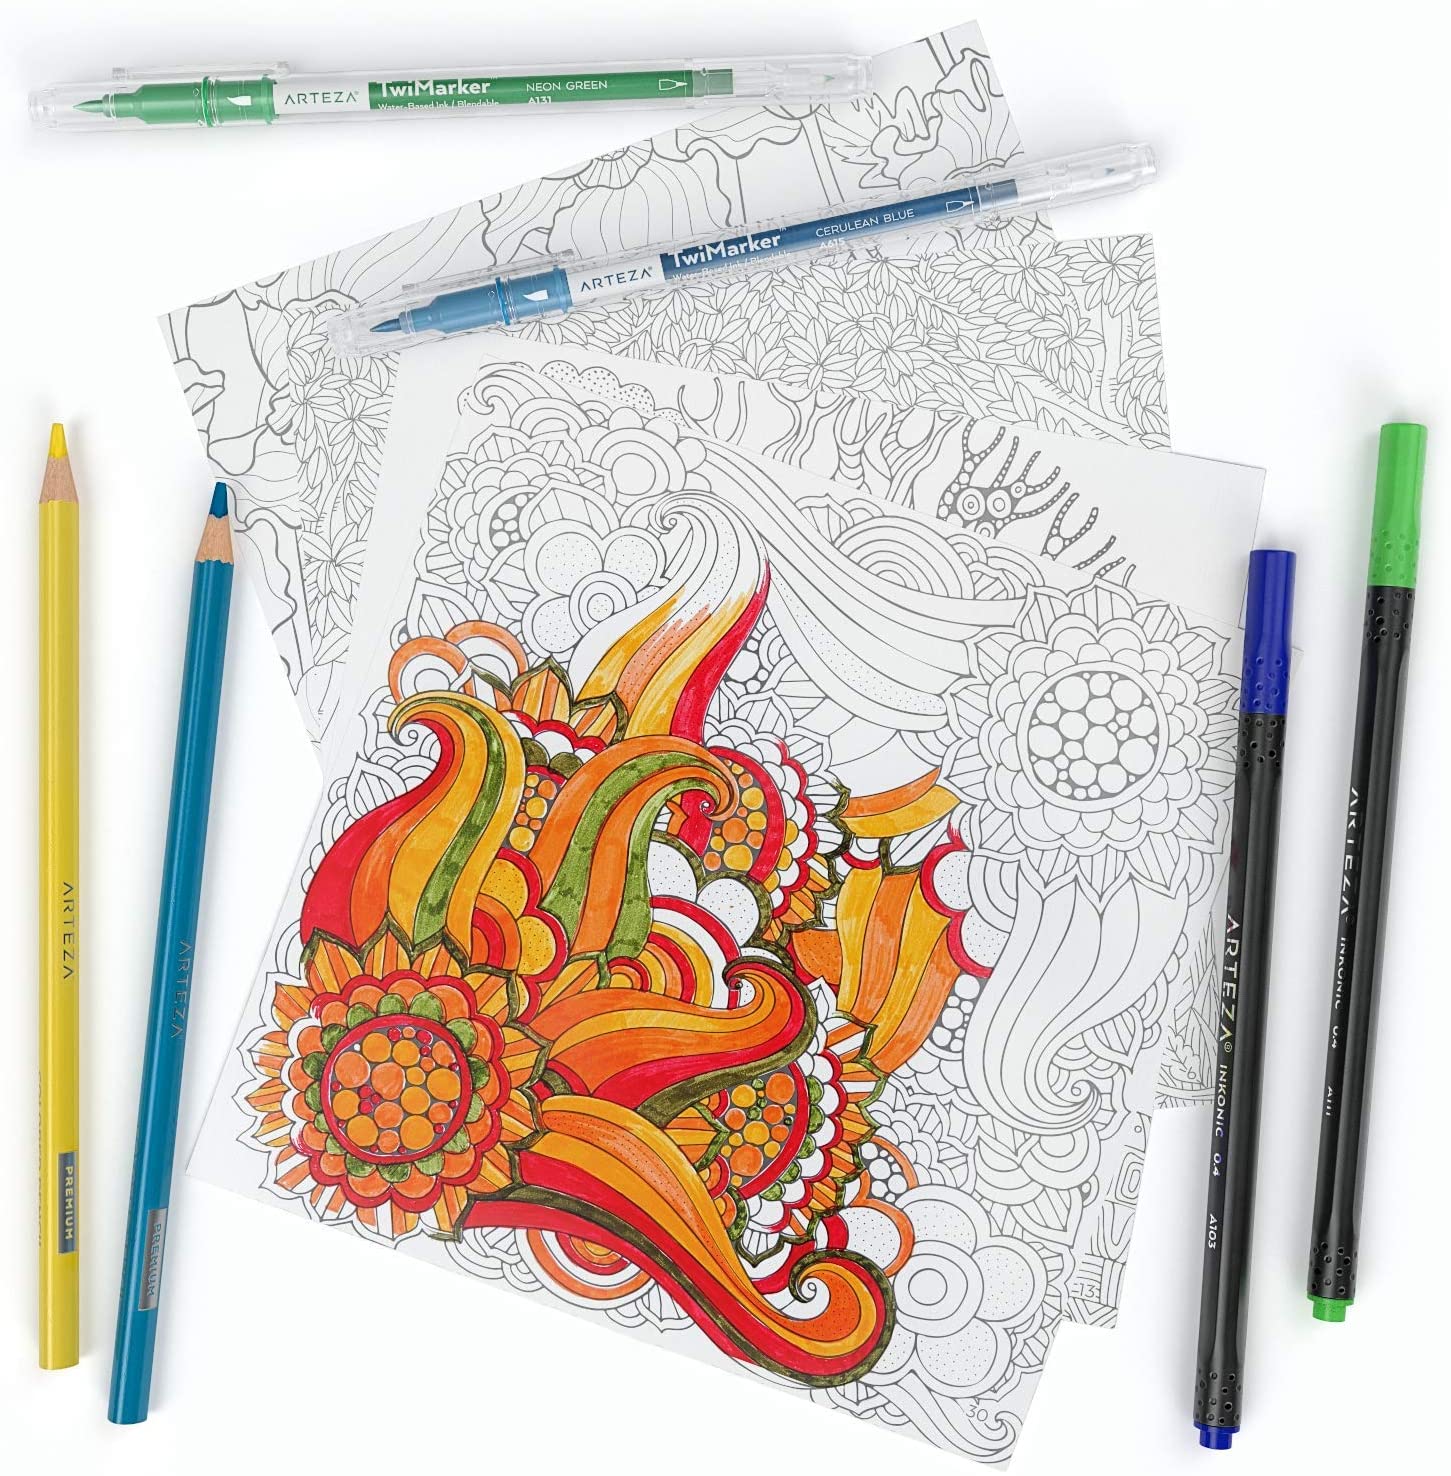 Floral Adult Coloring Books For Women by Eveline Kusabana